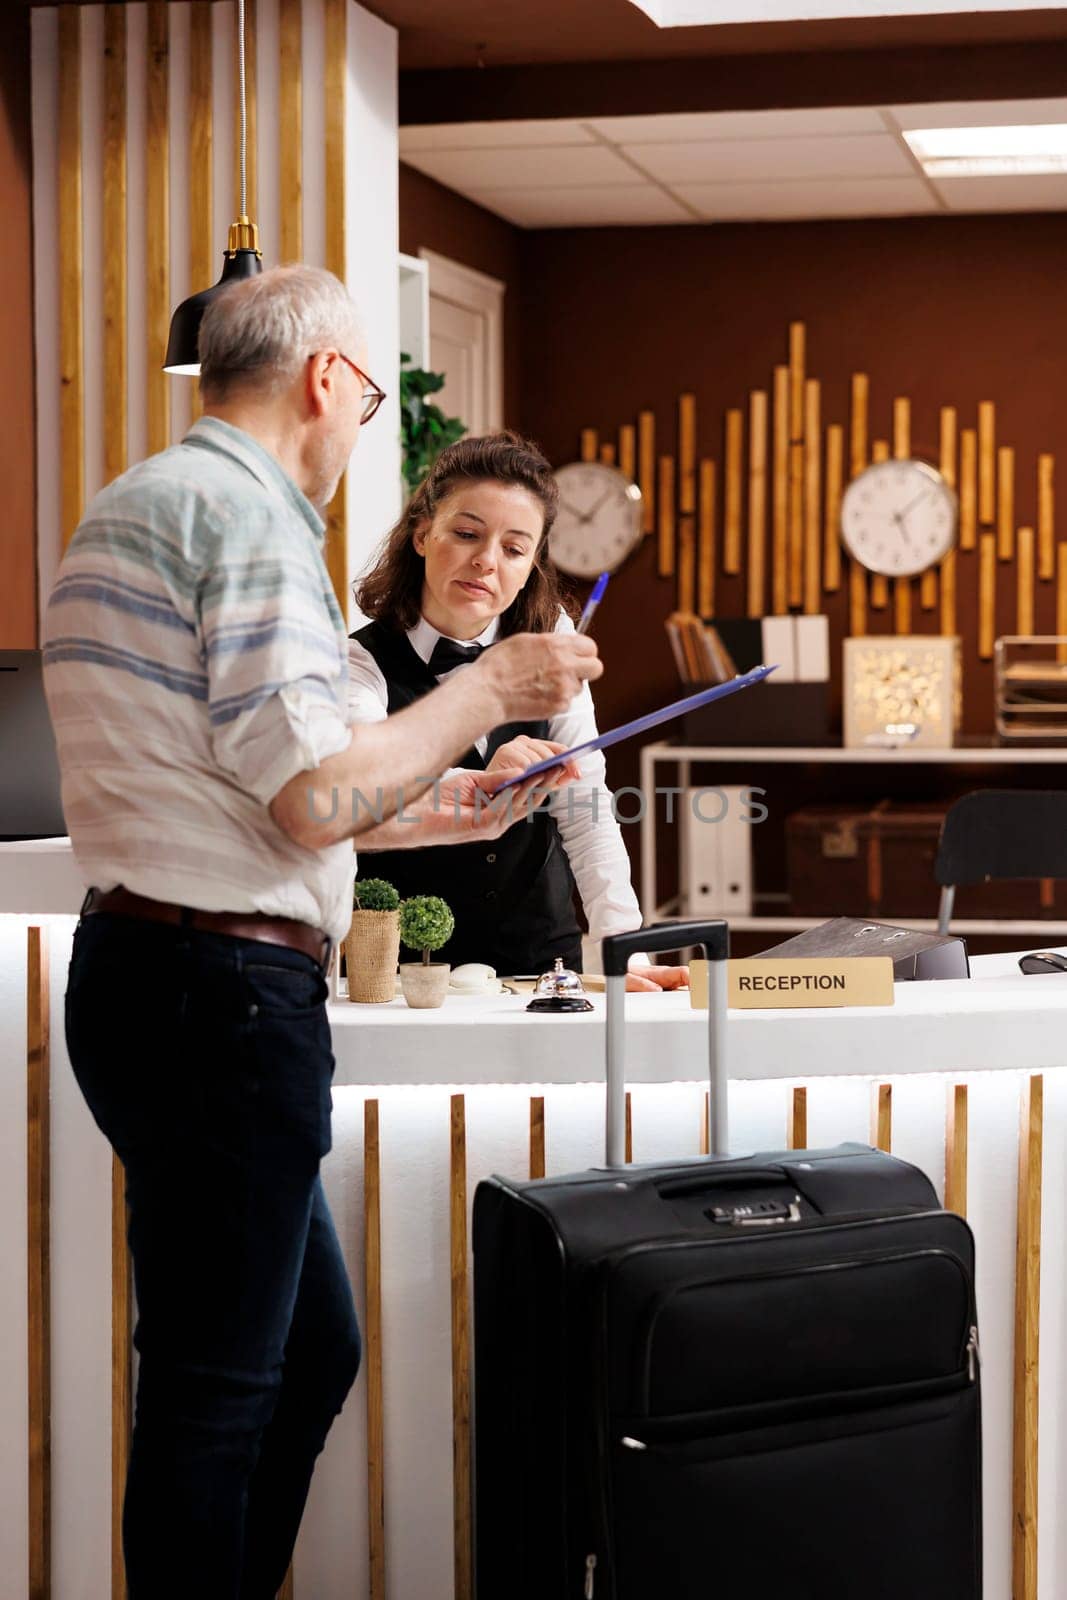 Senior man tourist checks in at the front desk of a hotel, eager for a pleasant holiday. While filling out booking reservation documents, a kind female concierge advises an old man traveller.